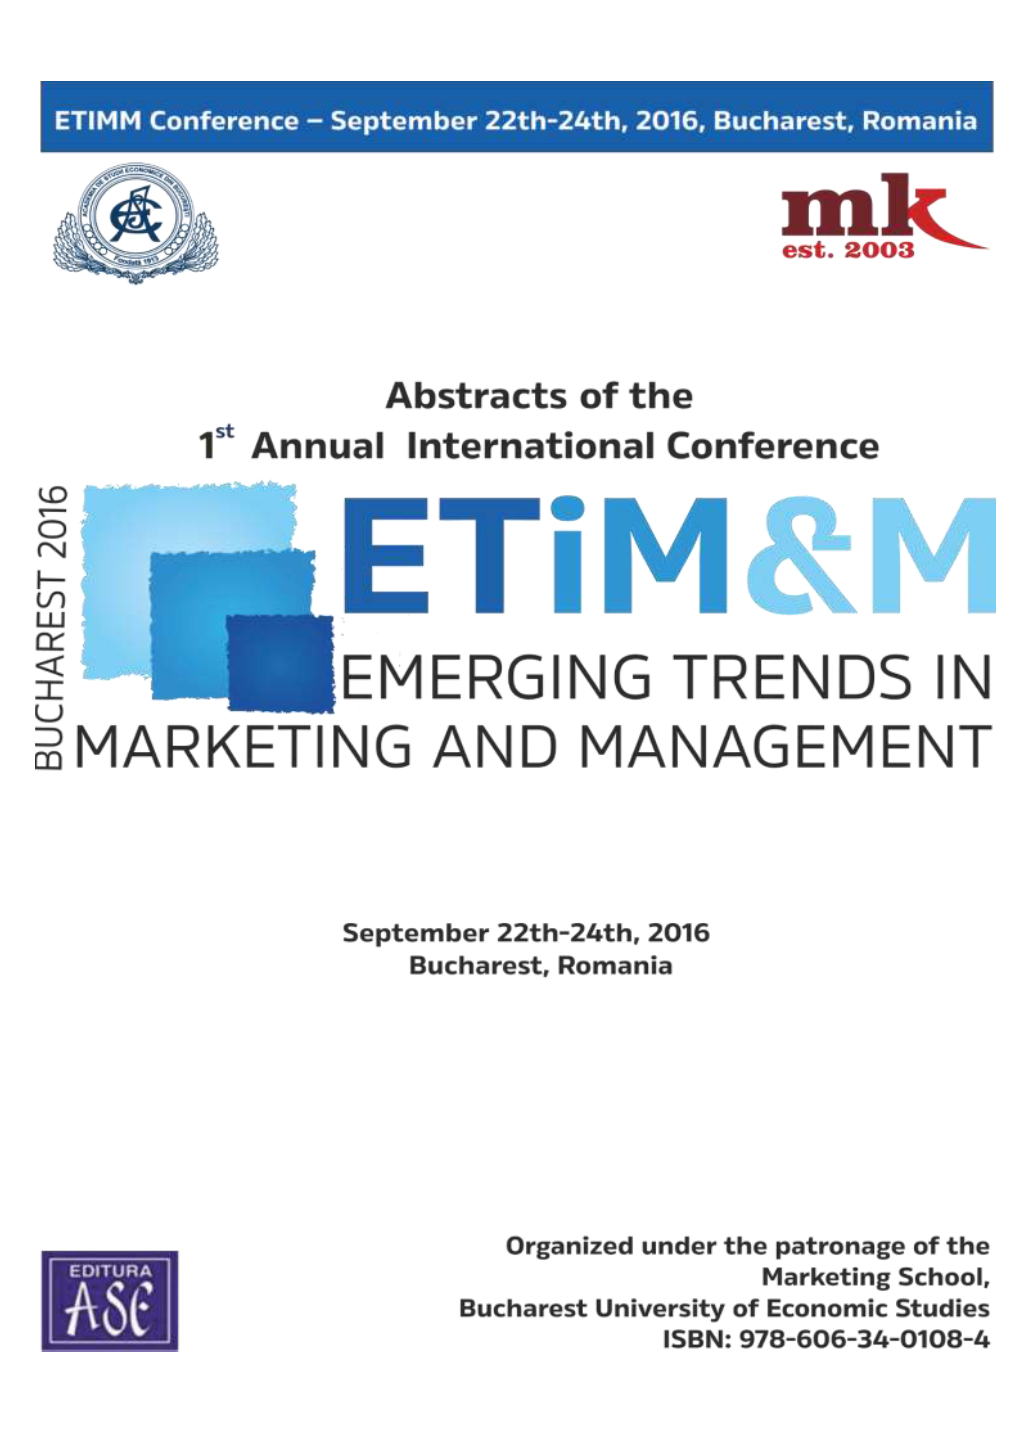 Abstracts of the 1St Annual Emerging Trends in Marketing And